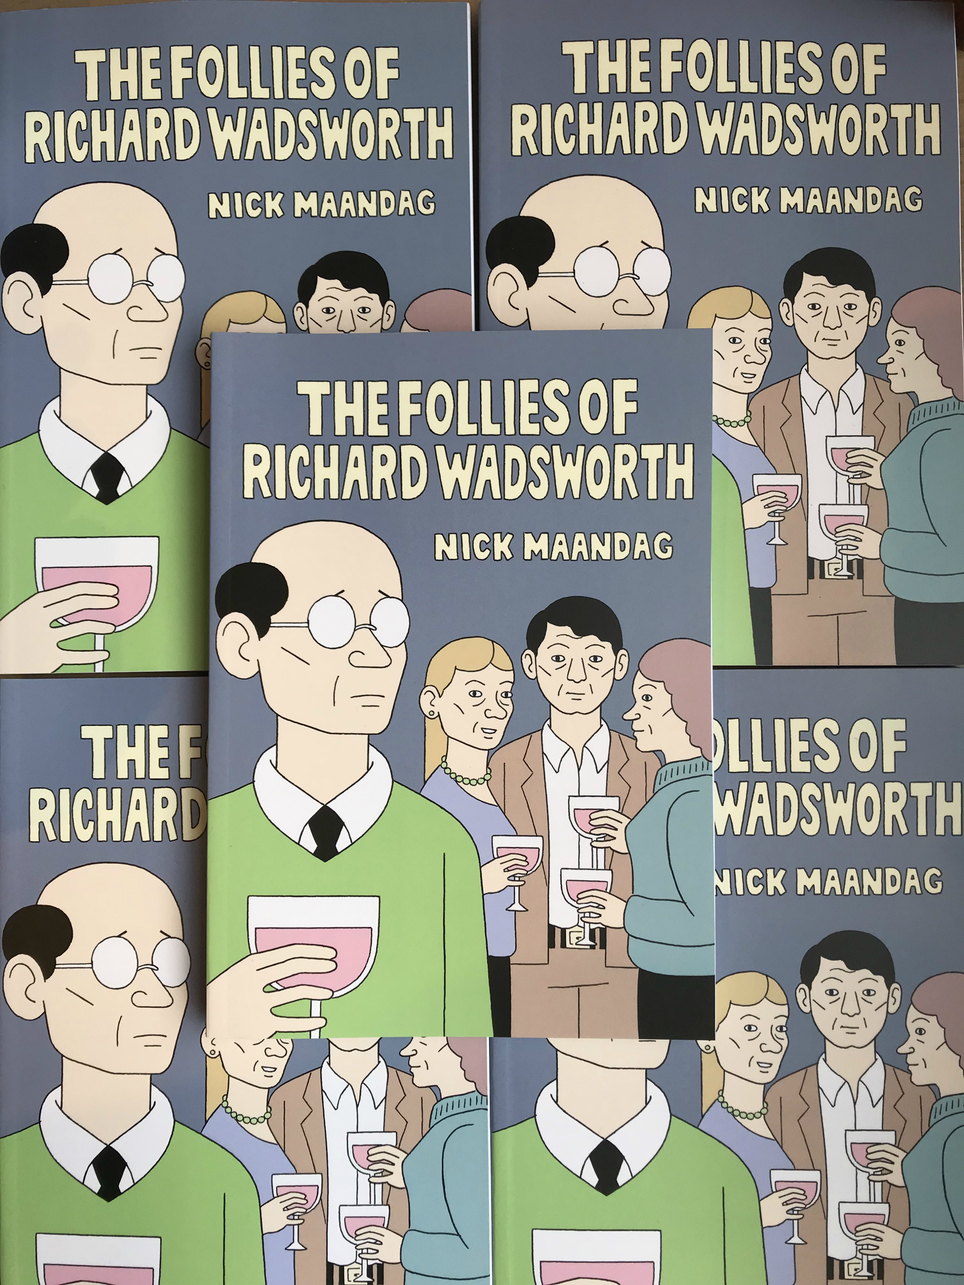 New D&Q: Nick Mandaag's The Follies of Richard Wadsworth is out now!